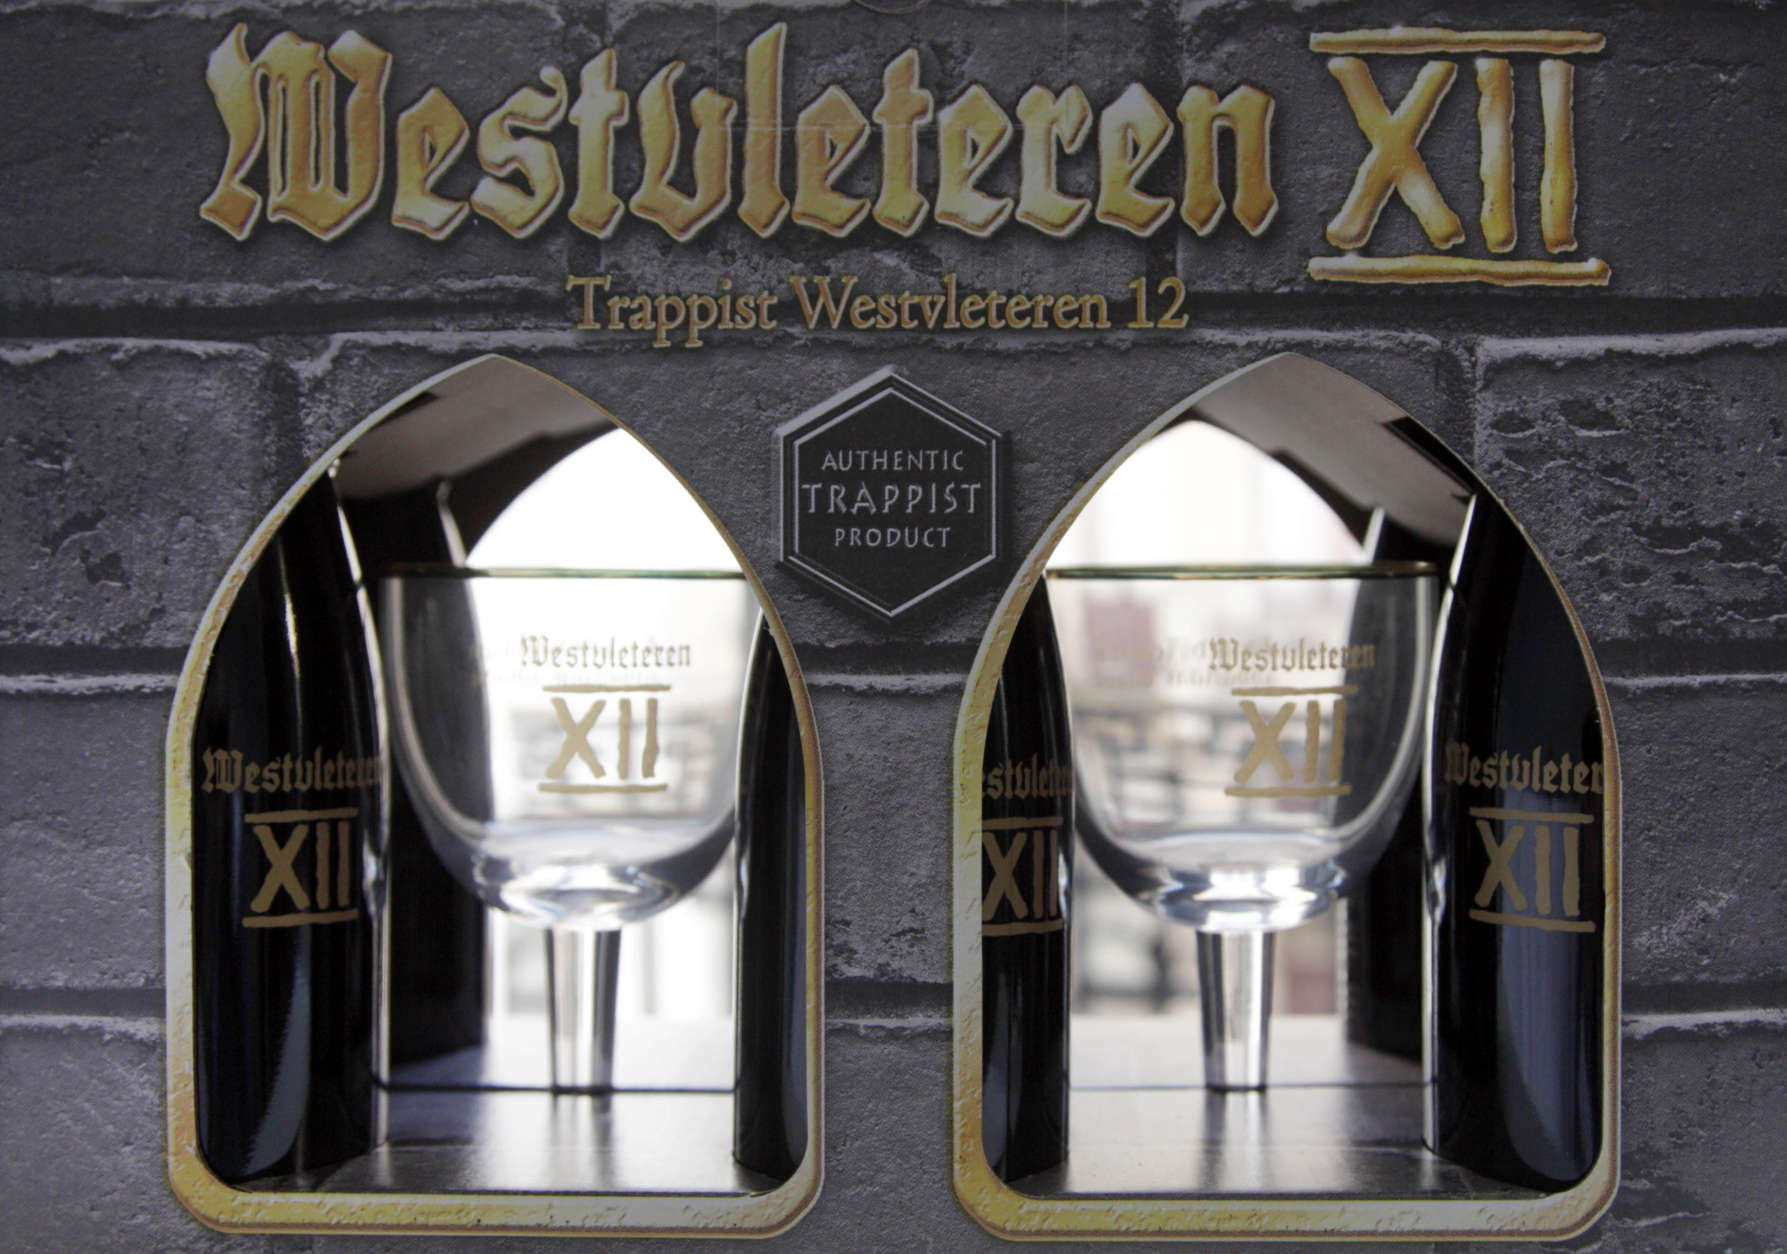 A gift pack of Westvleteren 12 beer is shown in Antwerp, Belgium on Friday, Jan. 27, 2012.  On Friday the Westvleteren beer was once again voted number one in the world by votes received by the Internet ratebeer website, brewed by the St Sixtus Abbey (or Westvleteren Abdij) owned and operated by the monks of the St Sixtus Abbey. (AP Photo/Virginia Mayo)